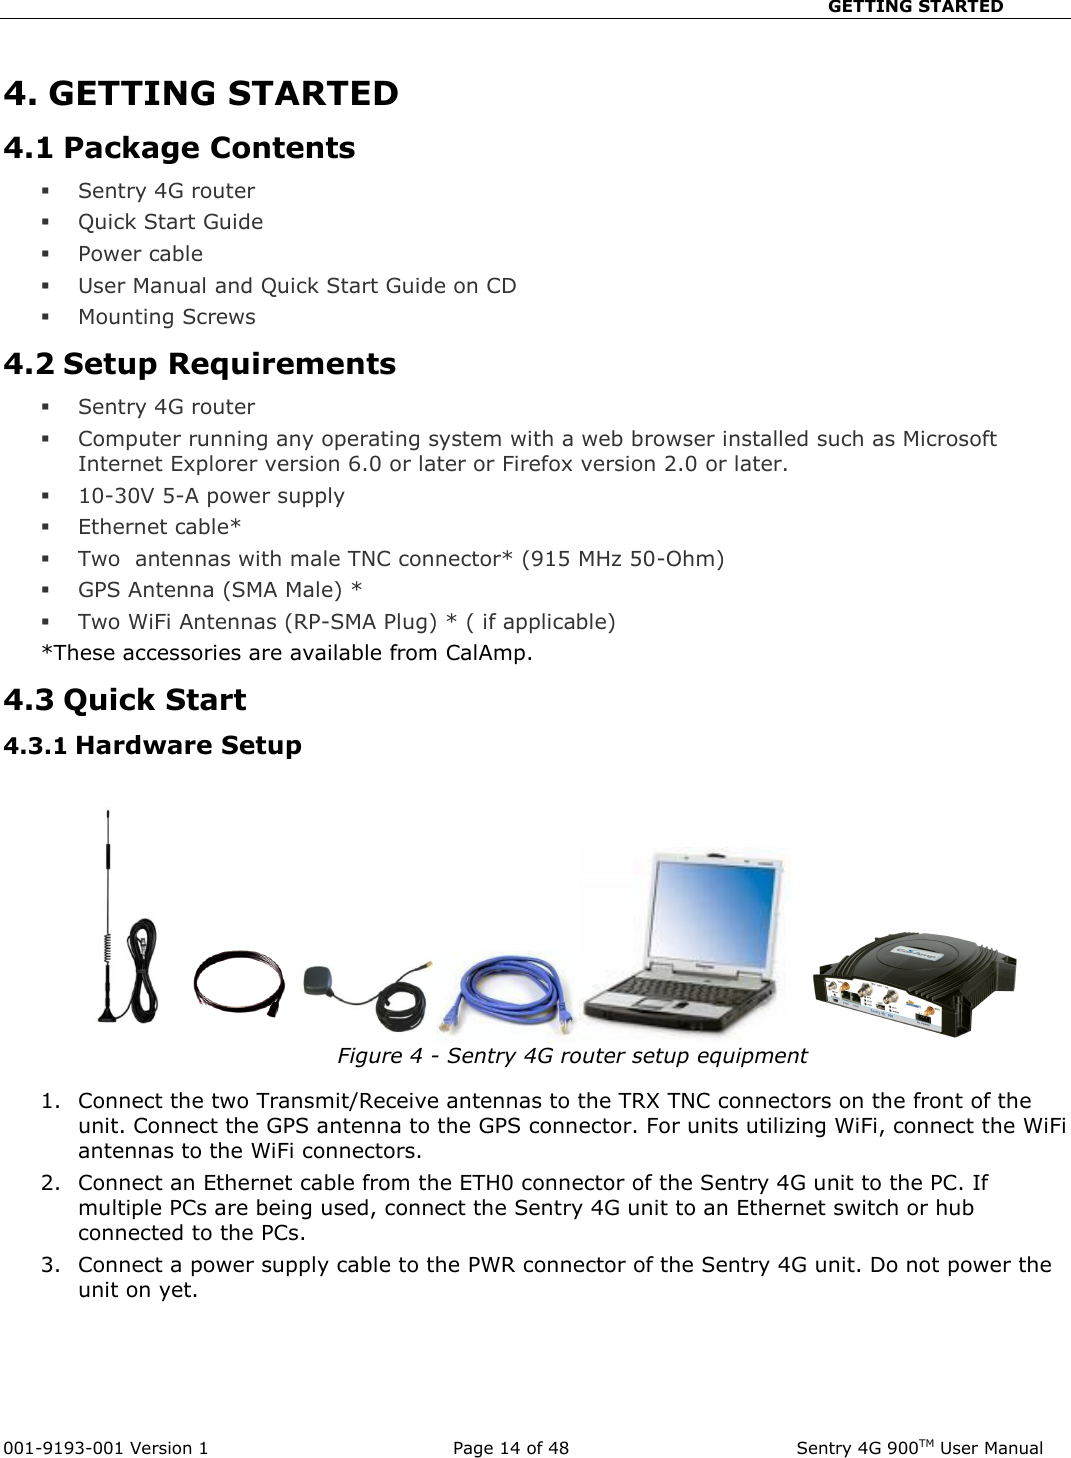                                                       GETTING STARTED  001-9193-001 Version 1              Page 14 of 48               Sentry 4G 900TM User Manual 4. GETTING STARTED 4.1 Package Contents  Sentry 4G router   Quick Start Guide  Power cable   User Manual and Quick Start Guide on CD  Mounting Screws 4.2 Setup Requirements  Sentry 4G router   Computer running any operating system with a web browser installed such as Microsoft Internet Explorer version 6.0 or later or Firefox version 2.0 or later.   10-30V 5-A power supply   Ethernet cable*  Two  antennas with male TNC connector* (915 MHz 50-Ohm)  GPS Antenna (SMA Male) *  Two WiFi Antennas (RP-SMA Plug) * ( if applicable) *These accessories are available from CalAmp. 4.3 Quick Start 4.3.1 Hardware Setup    Figure 4 - Sentry 4G router setup equipment   1. Connect the two Transmit/Receive antennas to the TRX TNC connectors on the front of the unit. Connect the GPS antenna to the GPS connector. For units utilizing WiFi, connect the WiFi antennas to the WiFi connectors. 2. Connect an Ethernet cable from the ETH0 connector of the Sentry 4G unit to the PC. If multiple PCs are being used, connect the Sentry 4G unit to an Ethernet switch or hub connected to the PCs.   3. Connect a power supply cable to the PWR connector of the Sentry 4G unit. Do not power the unit on yet.   